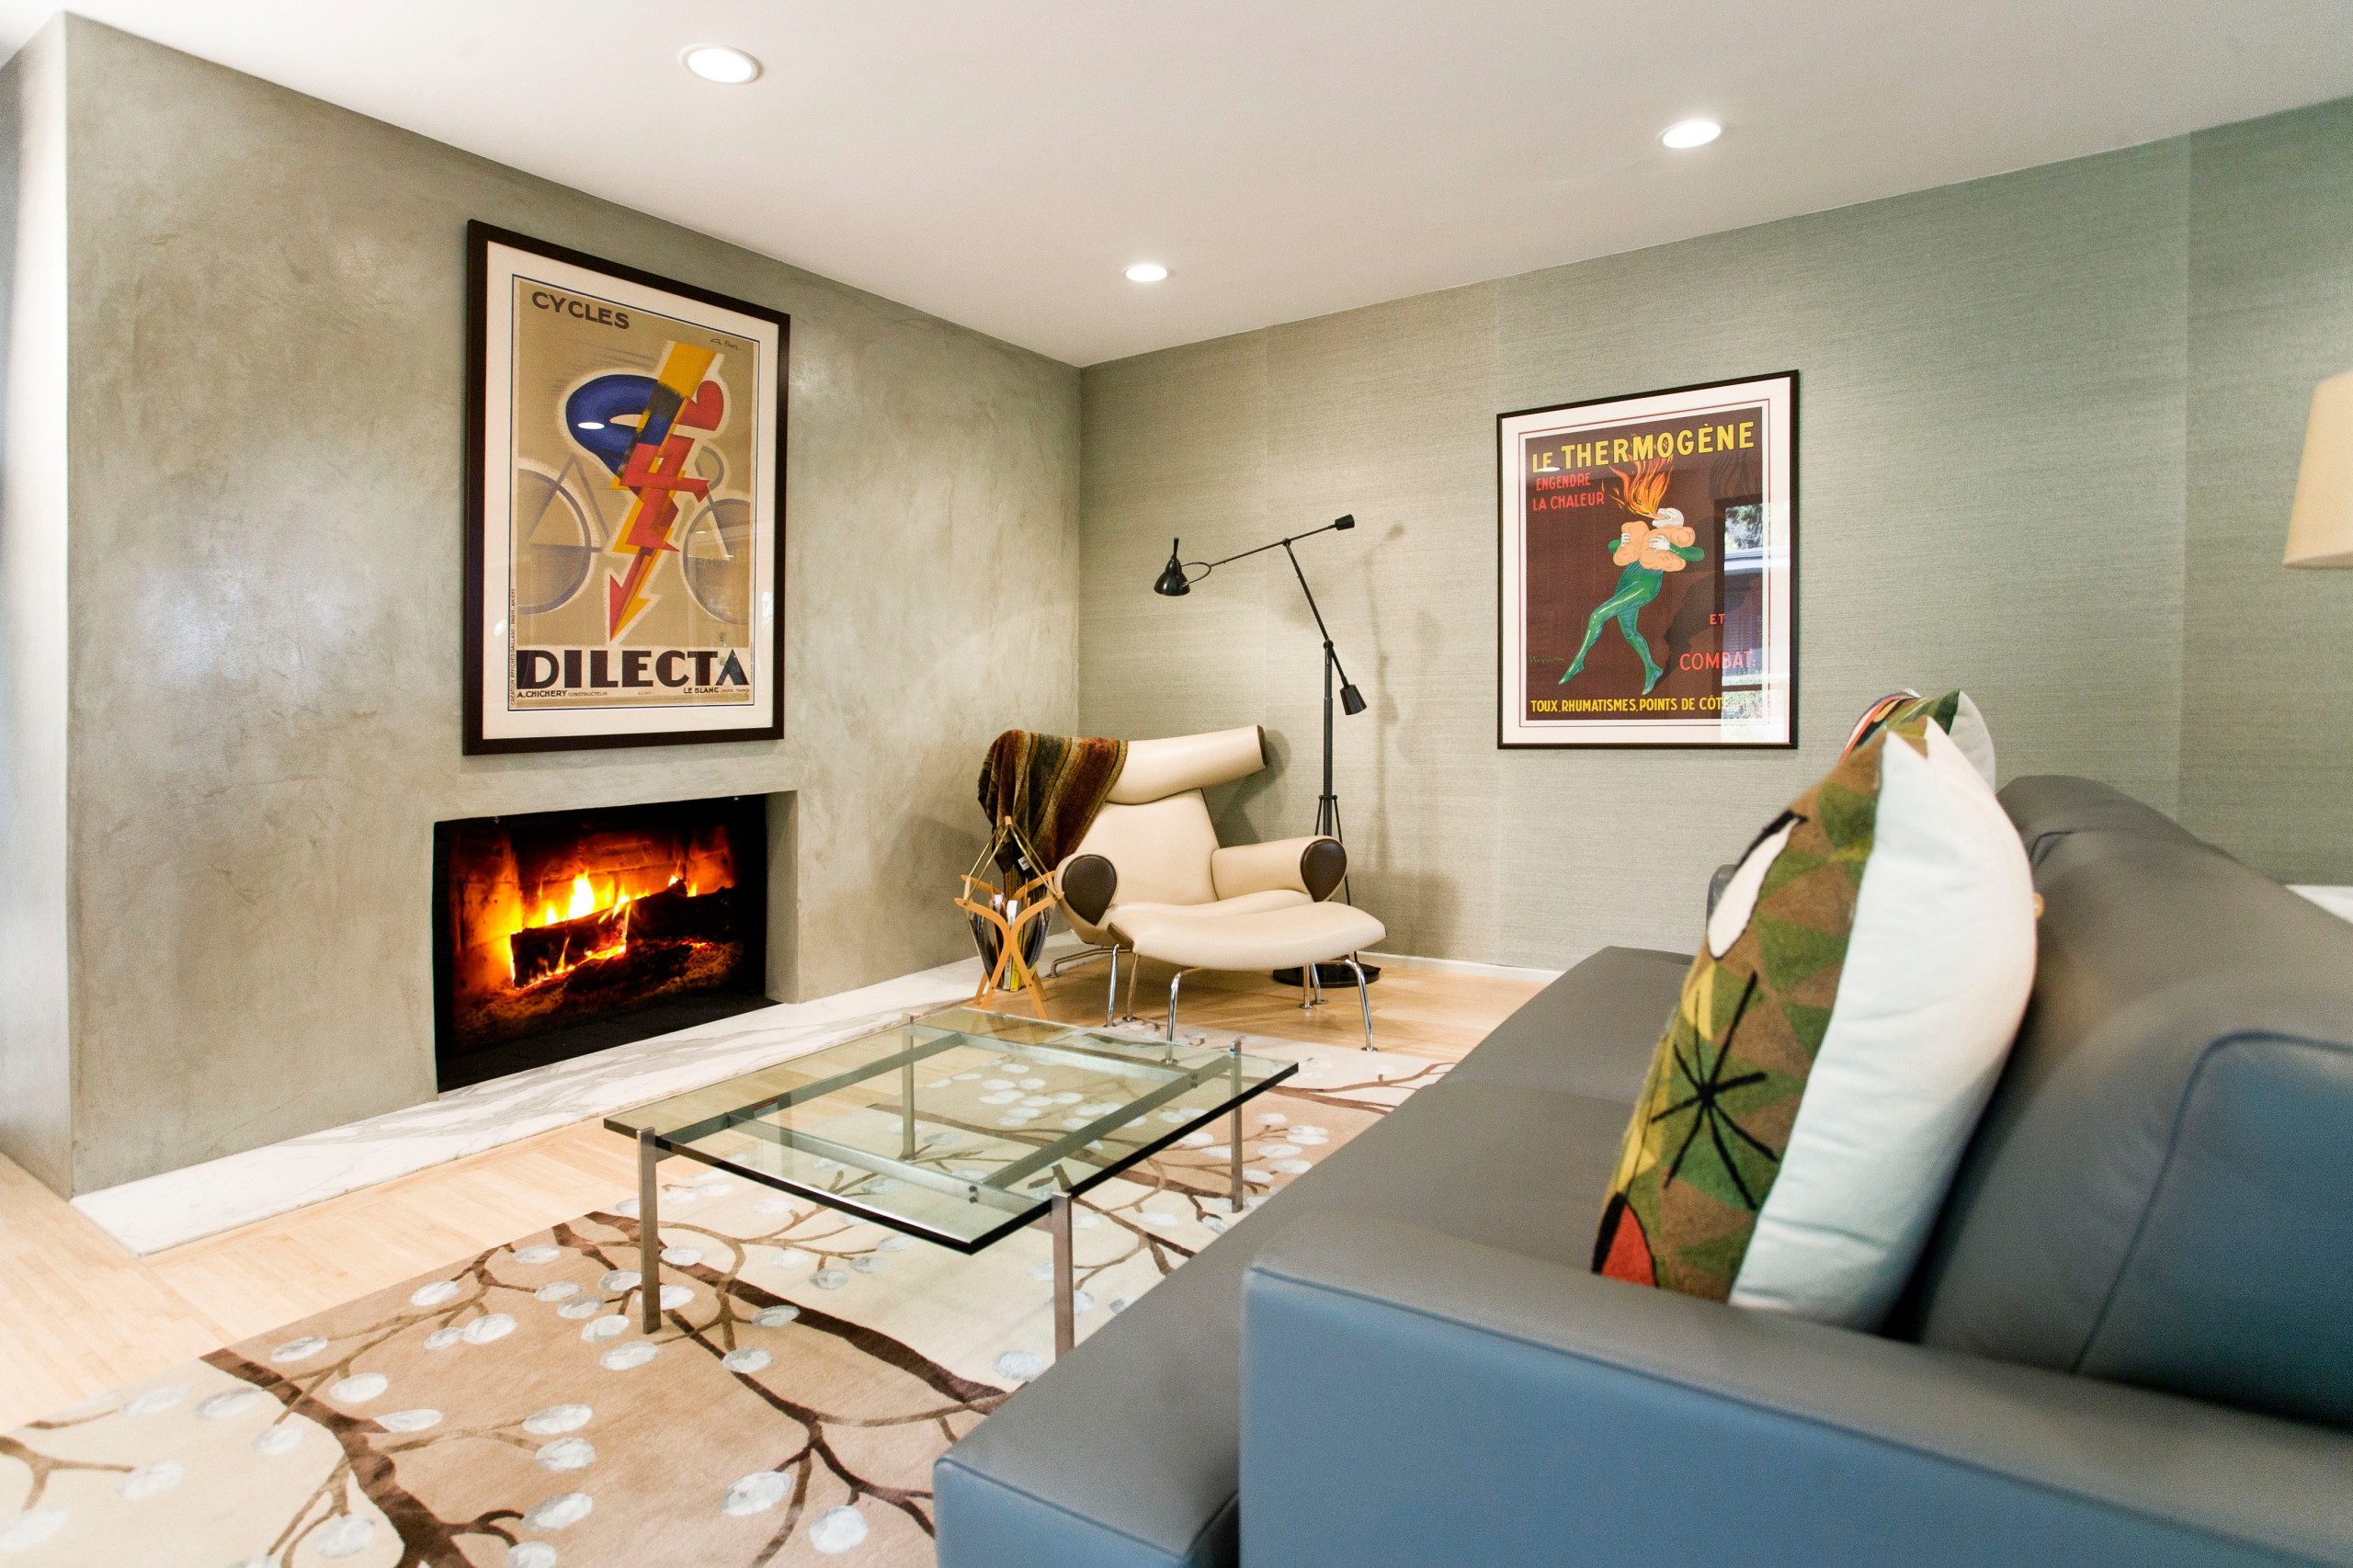 A Classic 1940's Mid Century Modern Home with Asian Design Influences